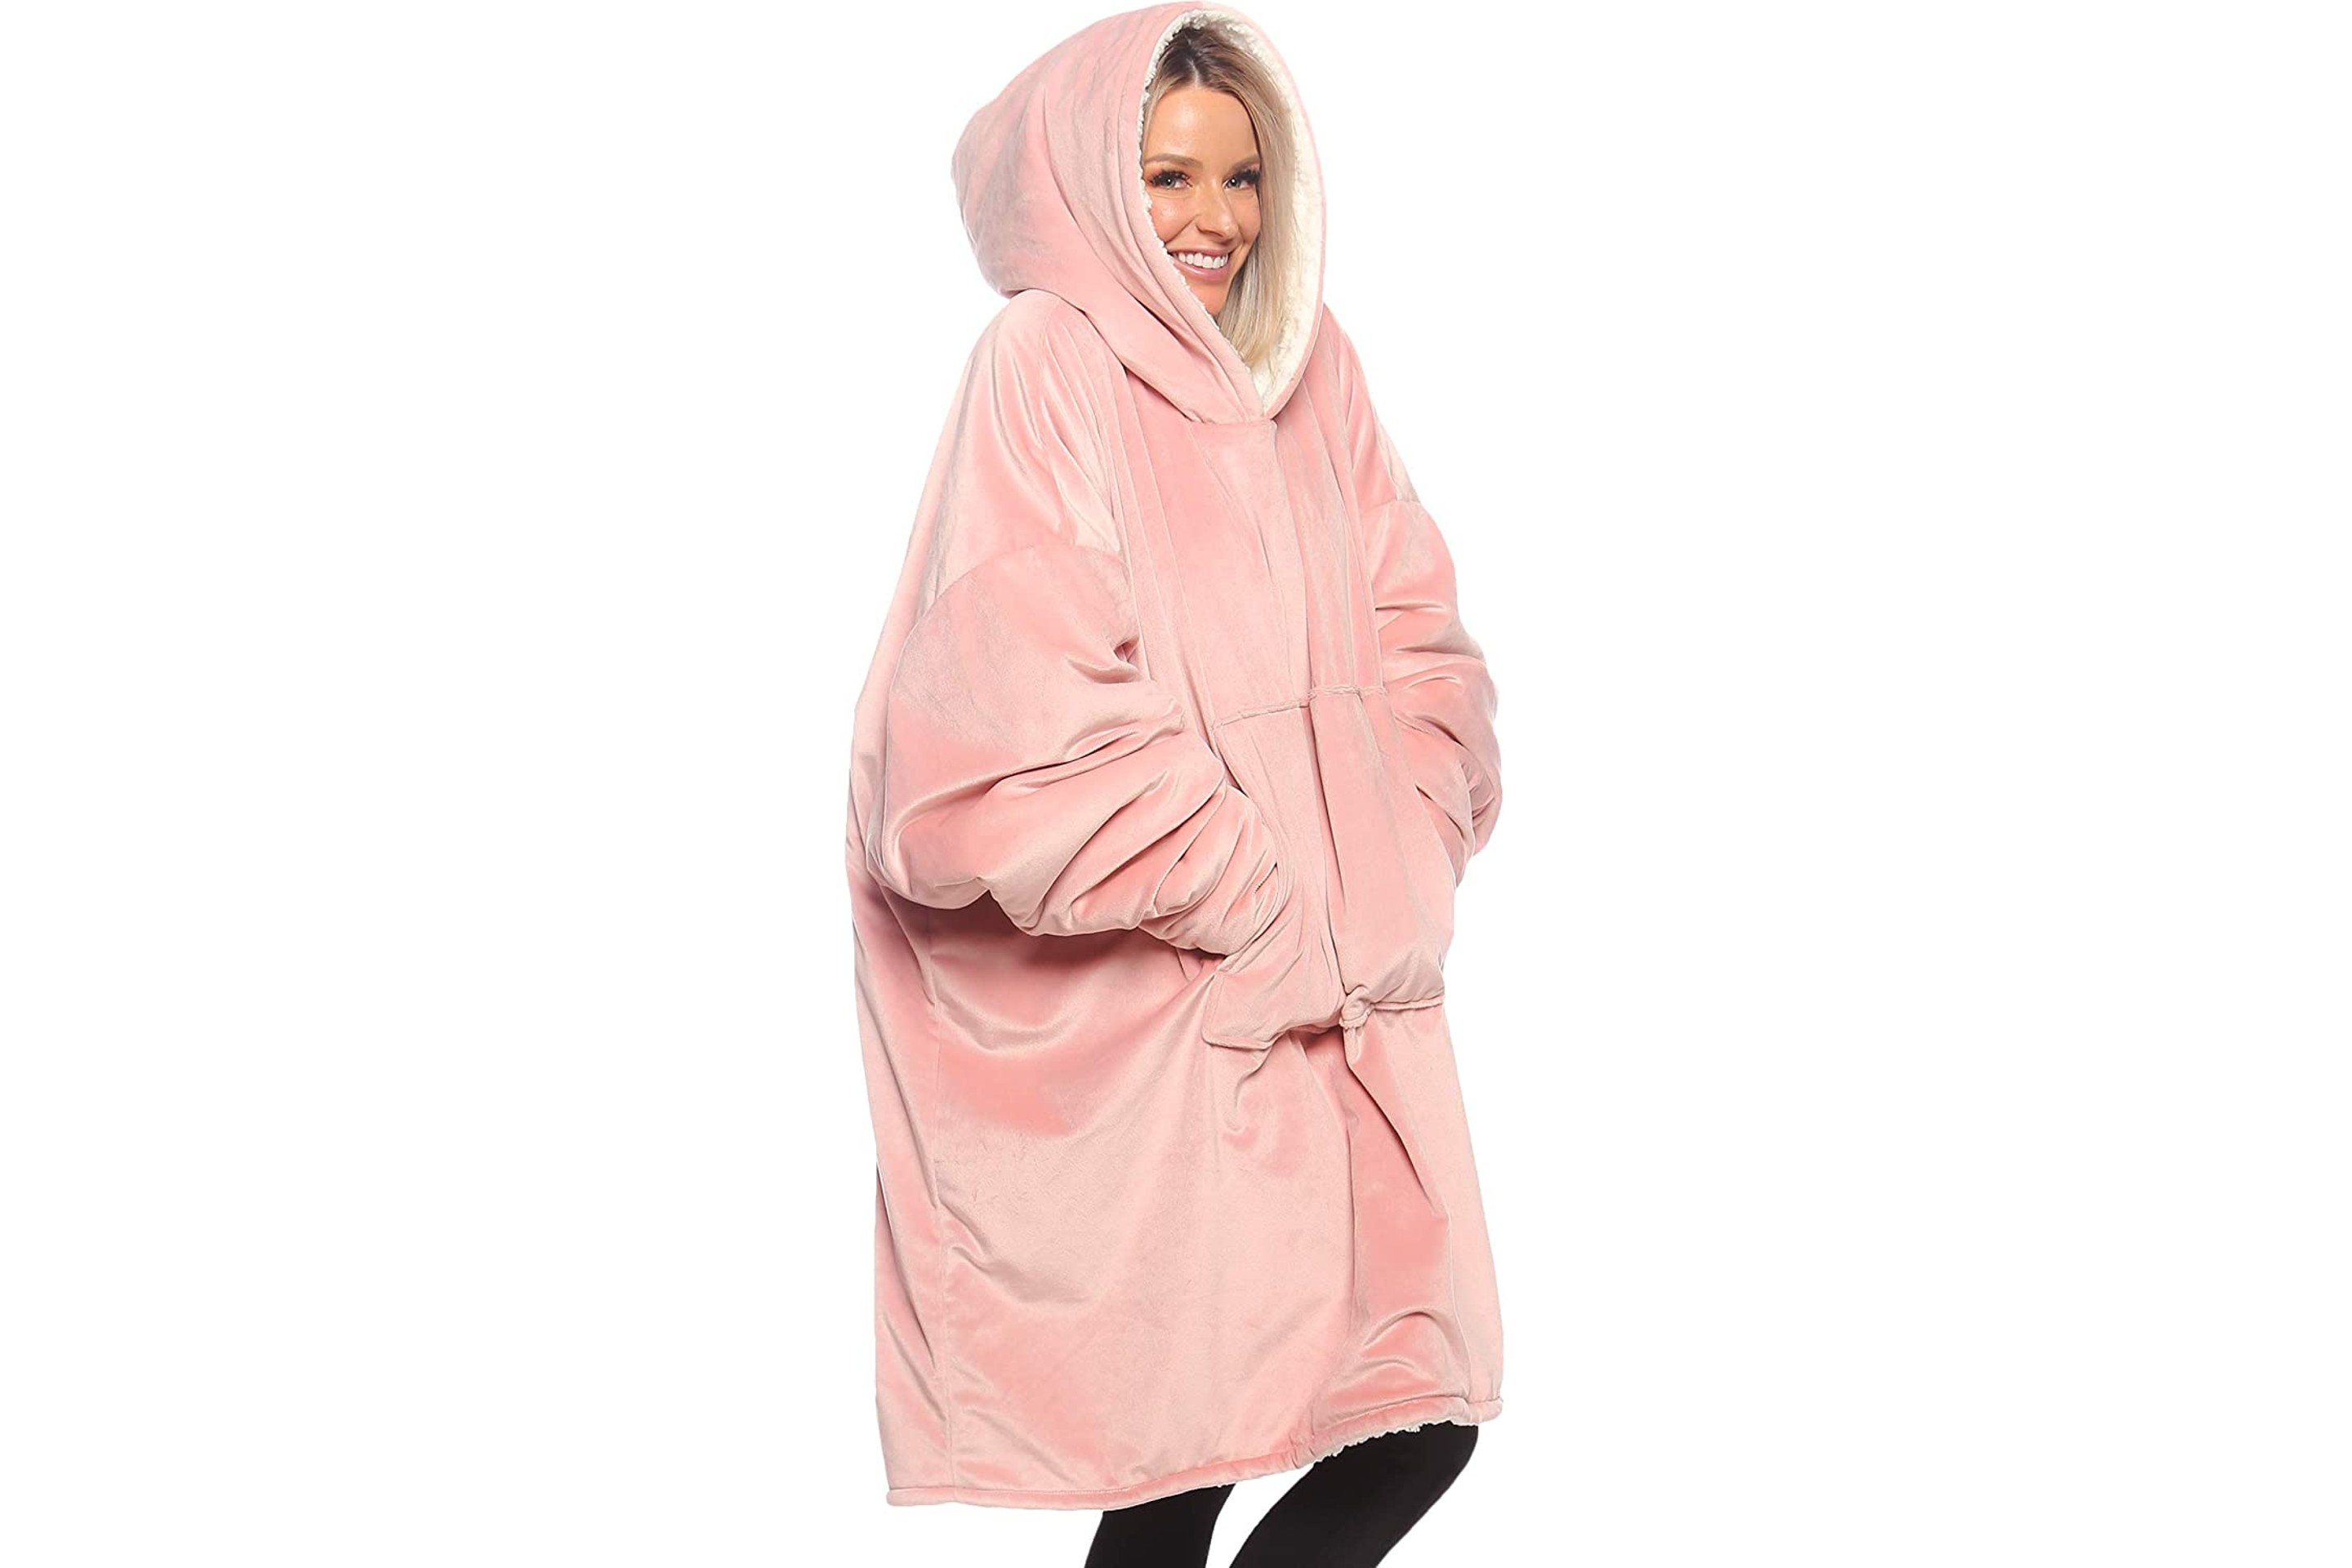 The COMFY Oversized Wearable Blanket